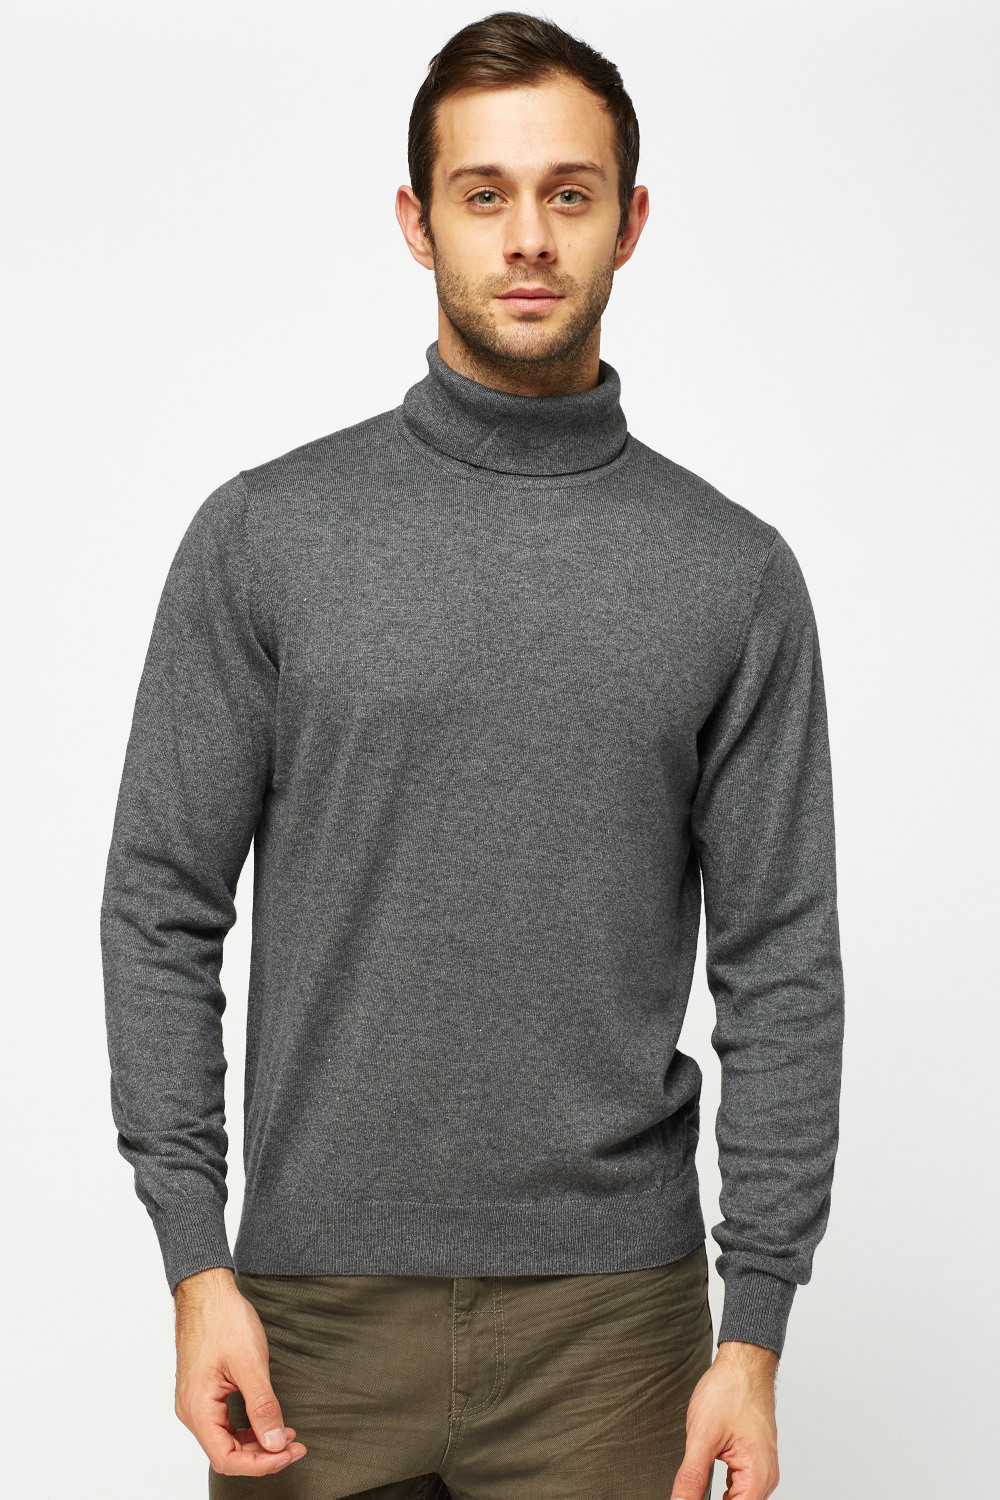 Turtle Neck Thin Knitted Jumper - Just $7